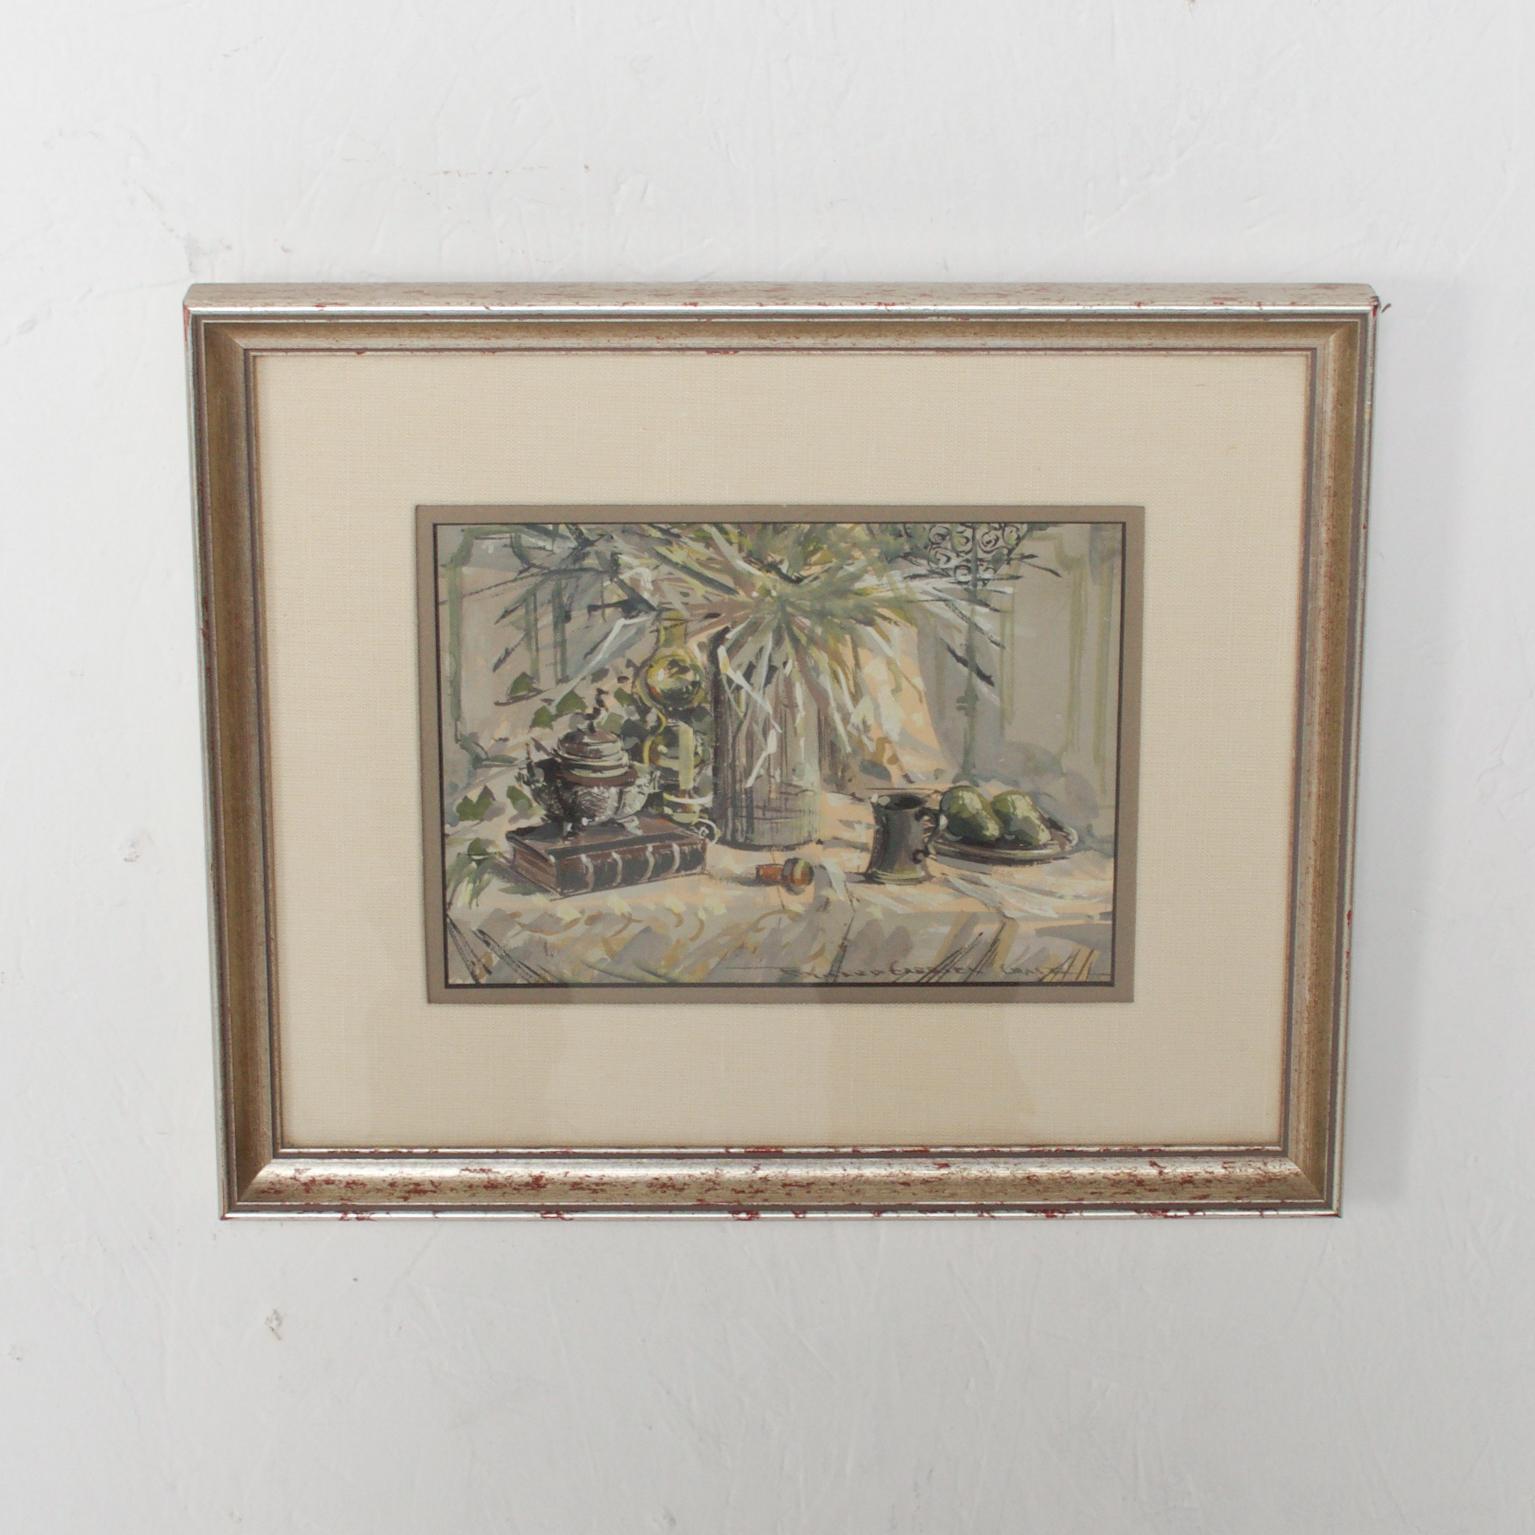 Art
Lovely Midcentury Watercolor, signed.
Bonita, California
Original frame with glass.
Dimensions: 13.25